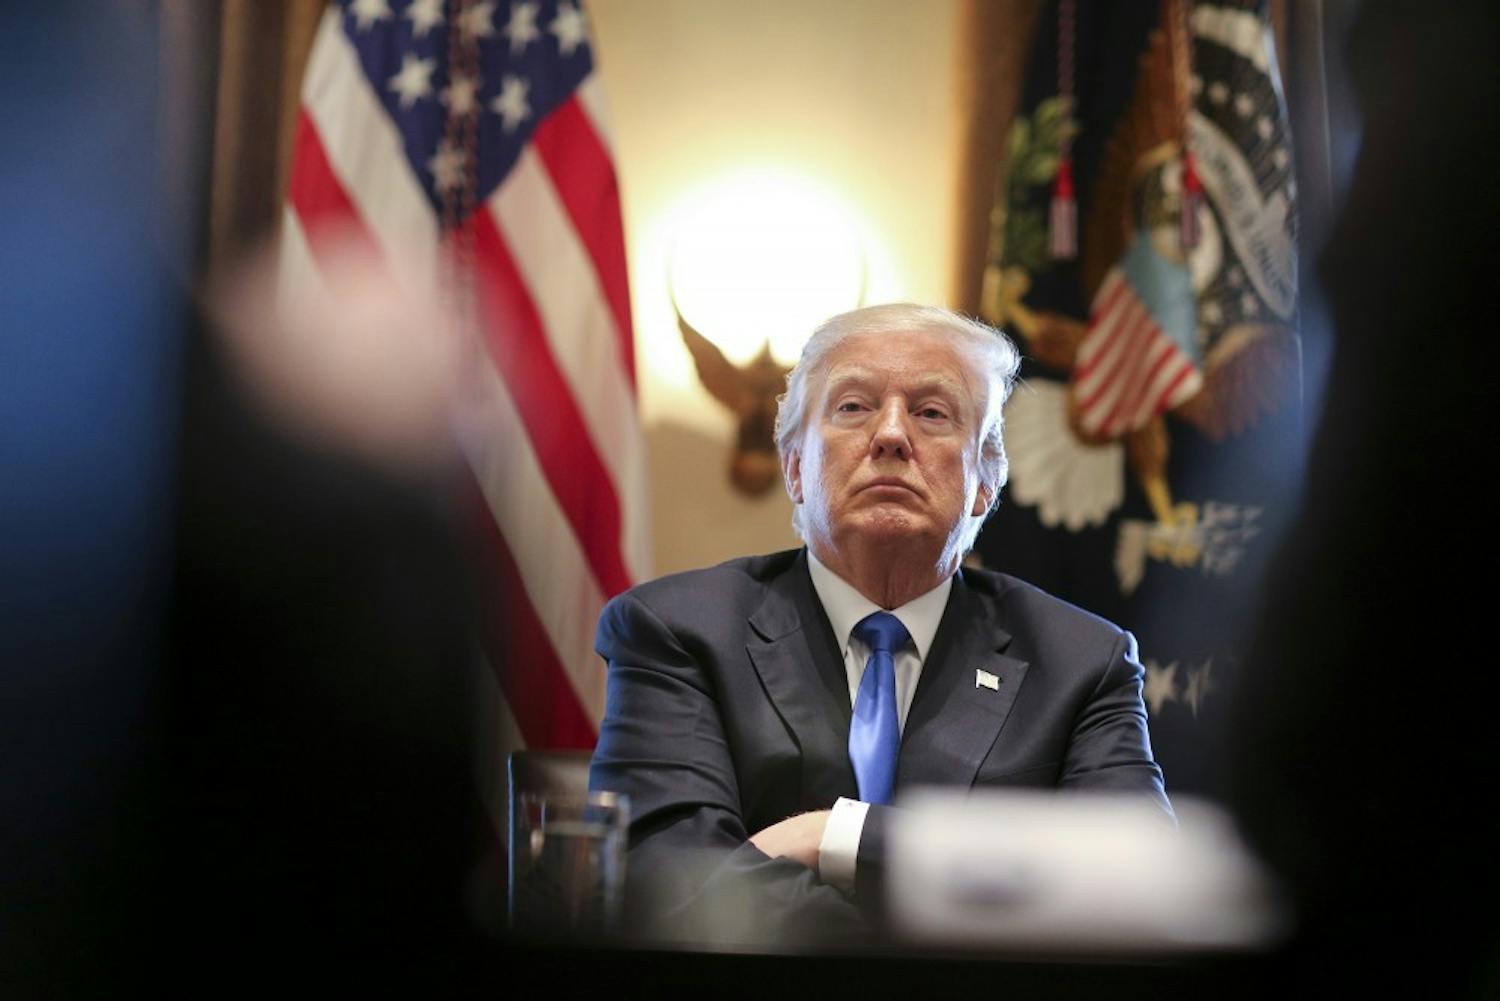 President Trump listens during a meeting with legislators on immigration reform in the Cabinet Room of the White House on Jan. 9, in Washington, D.C.